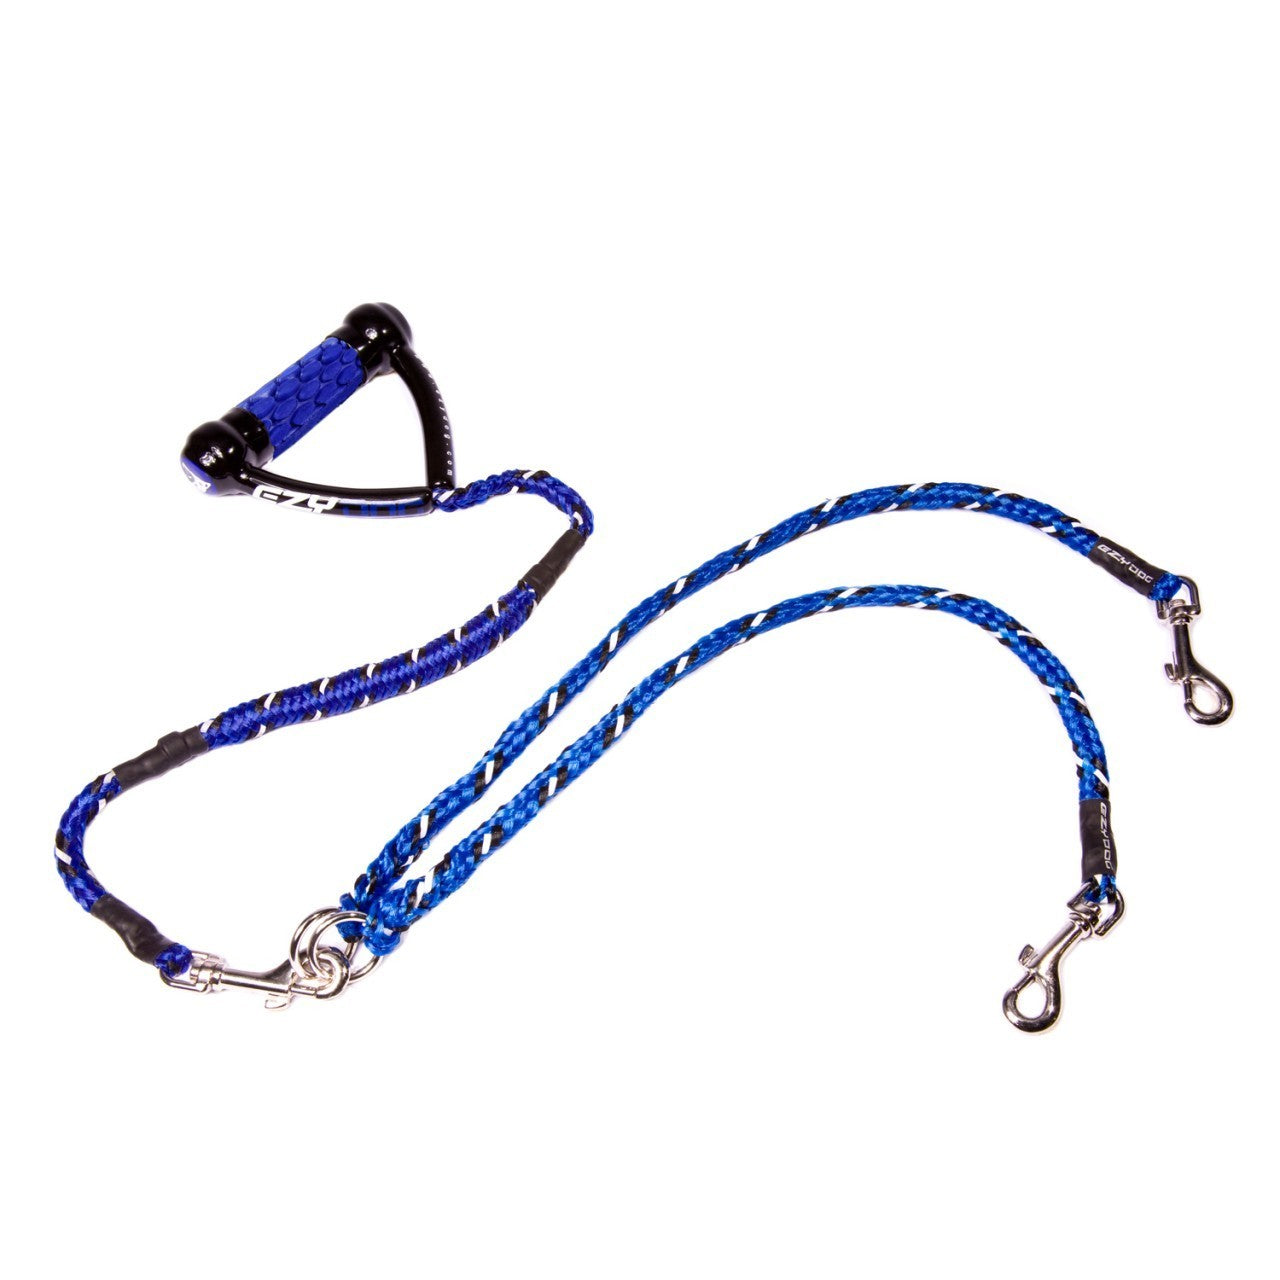 Two Dog Pull Absorbing Leash Solution